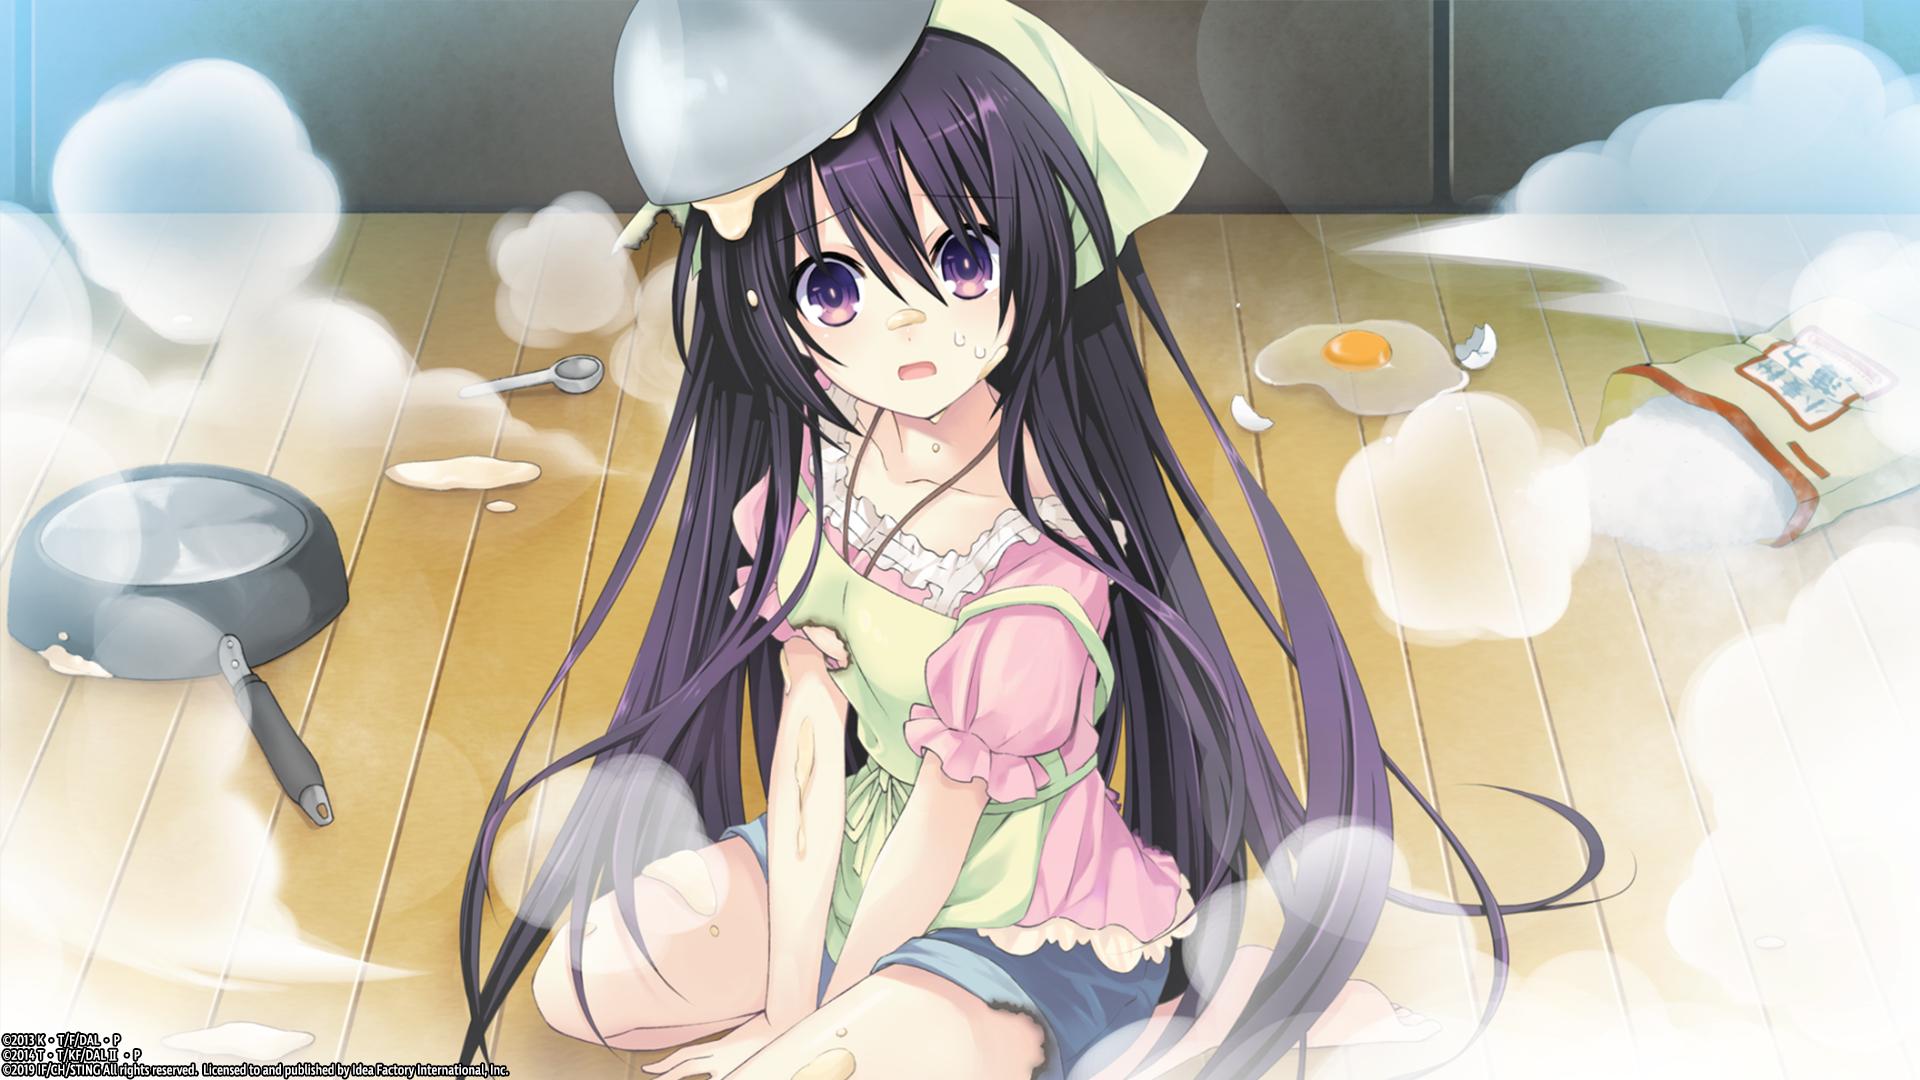 Idea Factory Intl Date A Live Rio Reincarnation Releases July 23 For Ps4 In North America Preorder For The Playstation 4 Today T Co 2v1i2sjh39 Iffy Cial Website T Co Msj0vzt0u6 Funimation T Co Csrji6rwmz